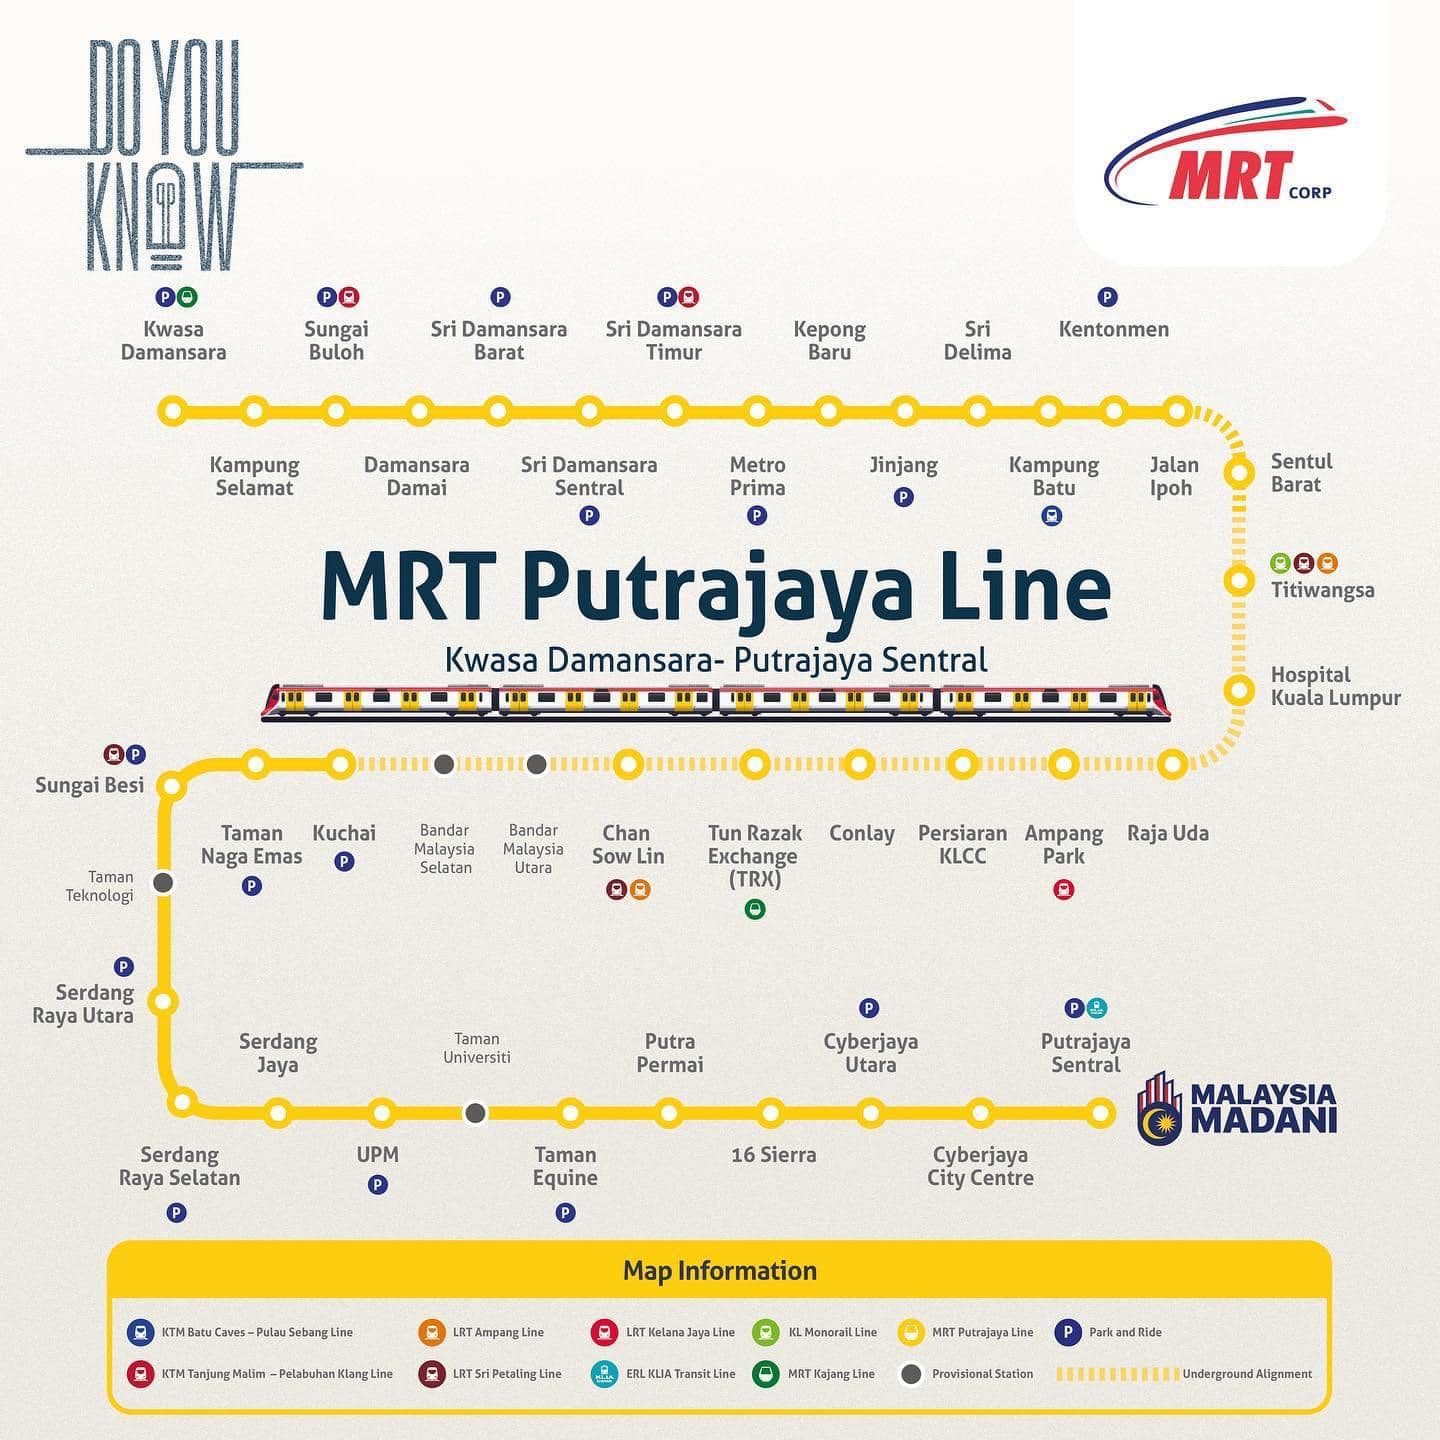 MRT Putrajaya Line launches with free rides and 36 stations